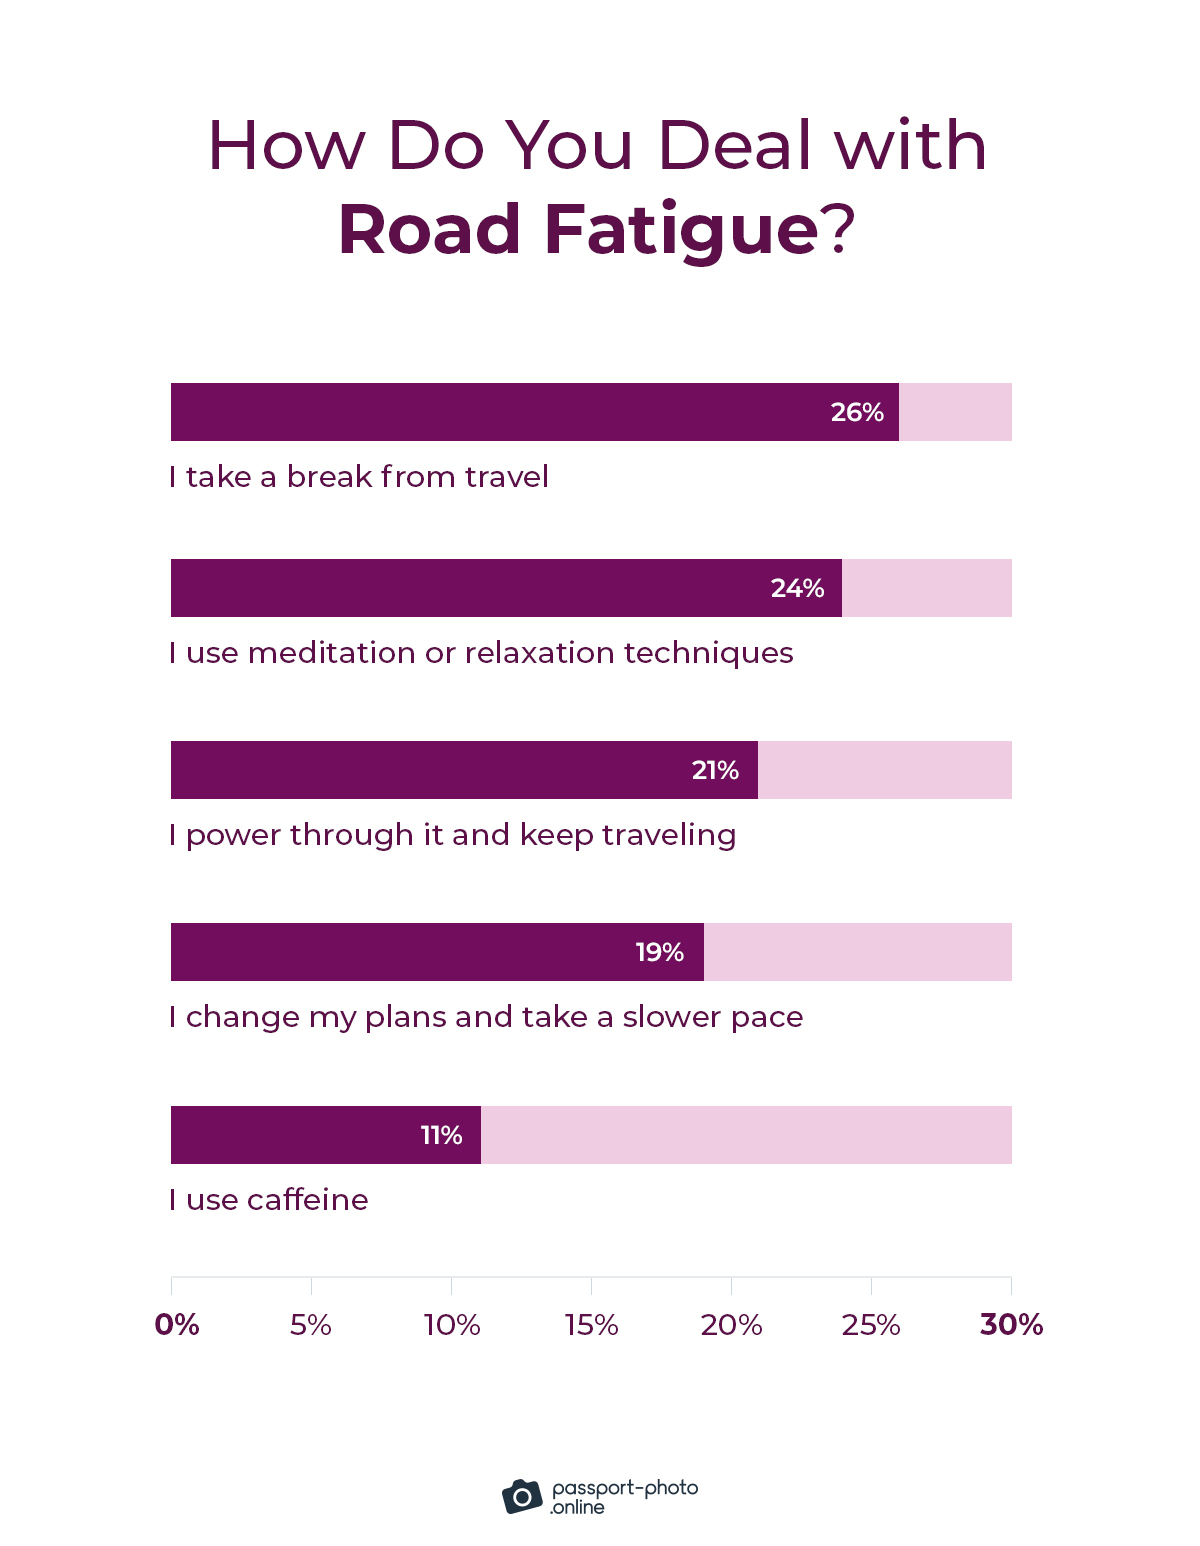 most digital nomads (26%) take a break from travel to deal with road fatigue